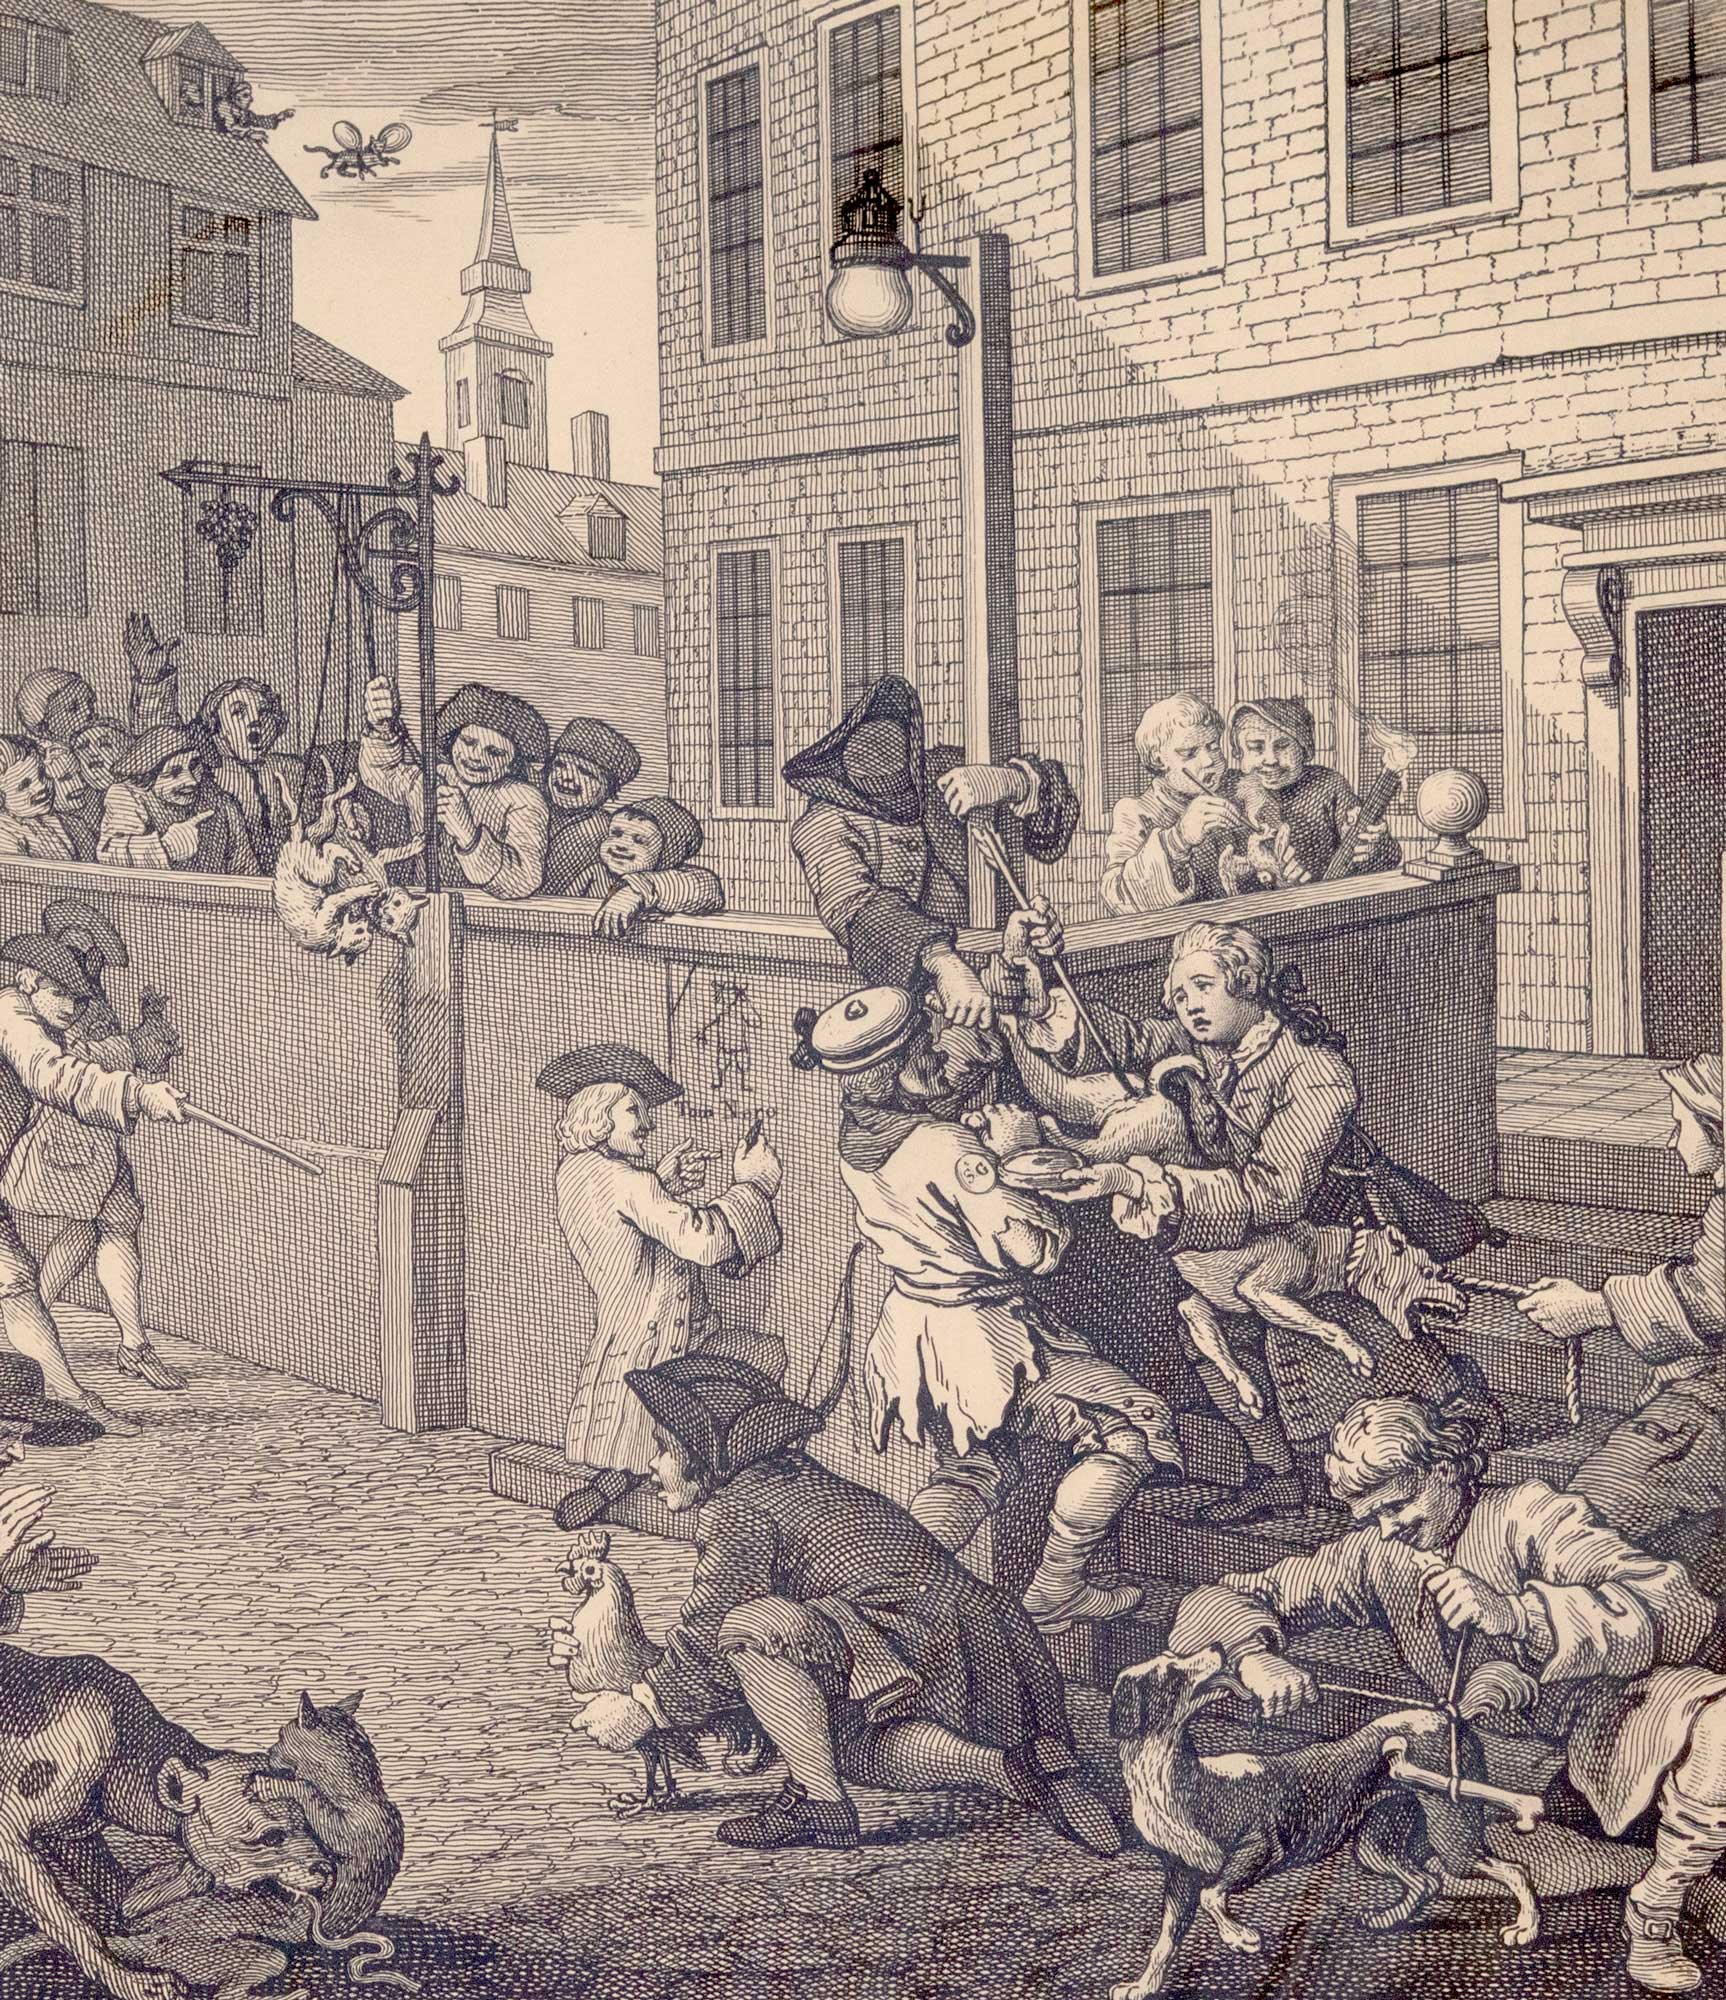 DETAIL: William Hogarth - The First Stage of Cruelty